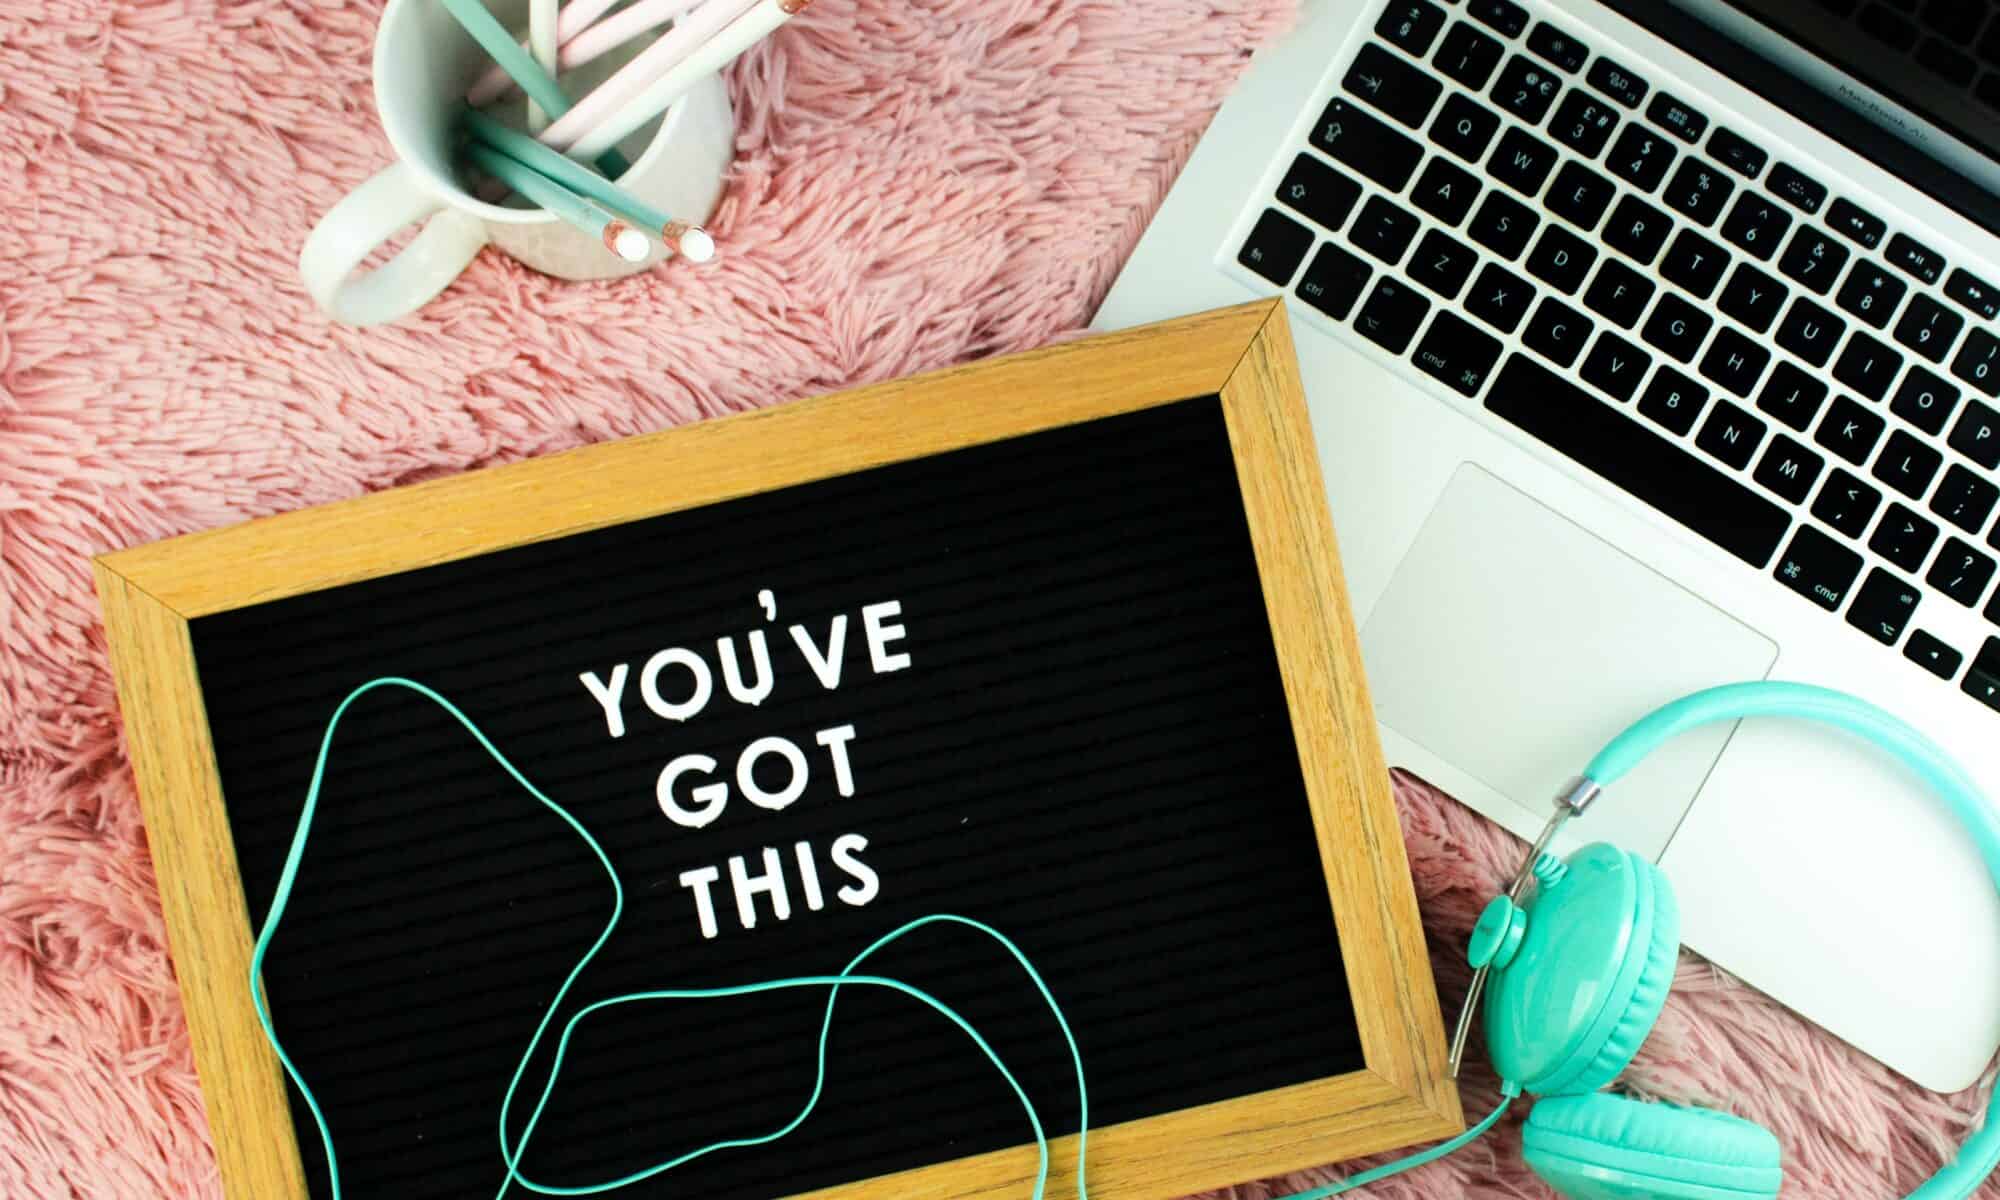 Photo of computer and quote that say "You've got this"